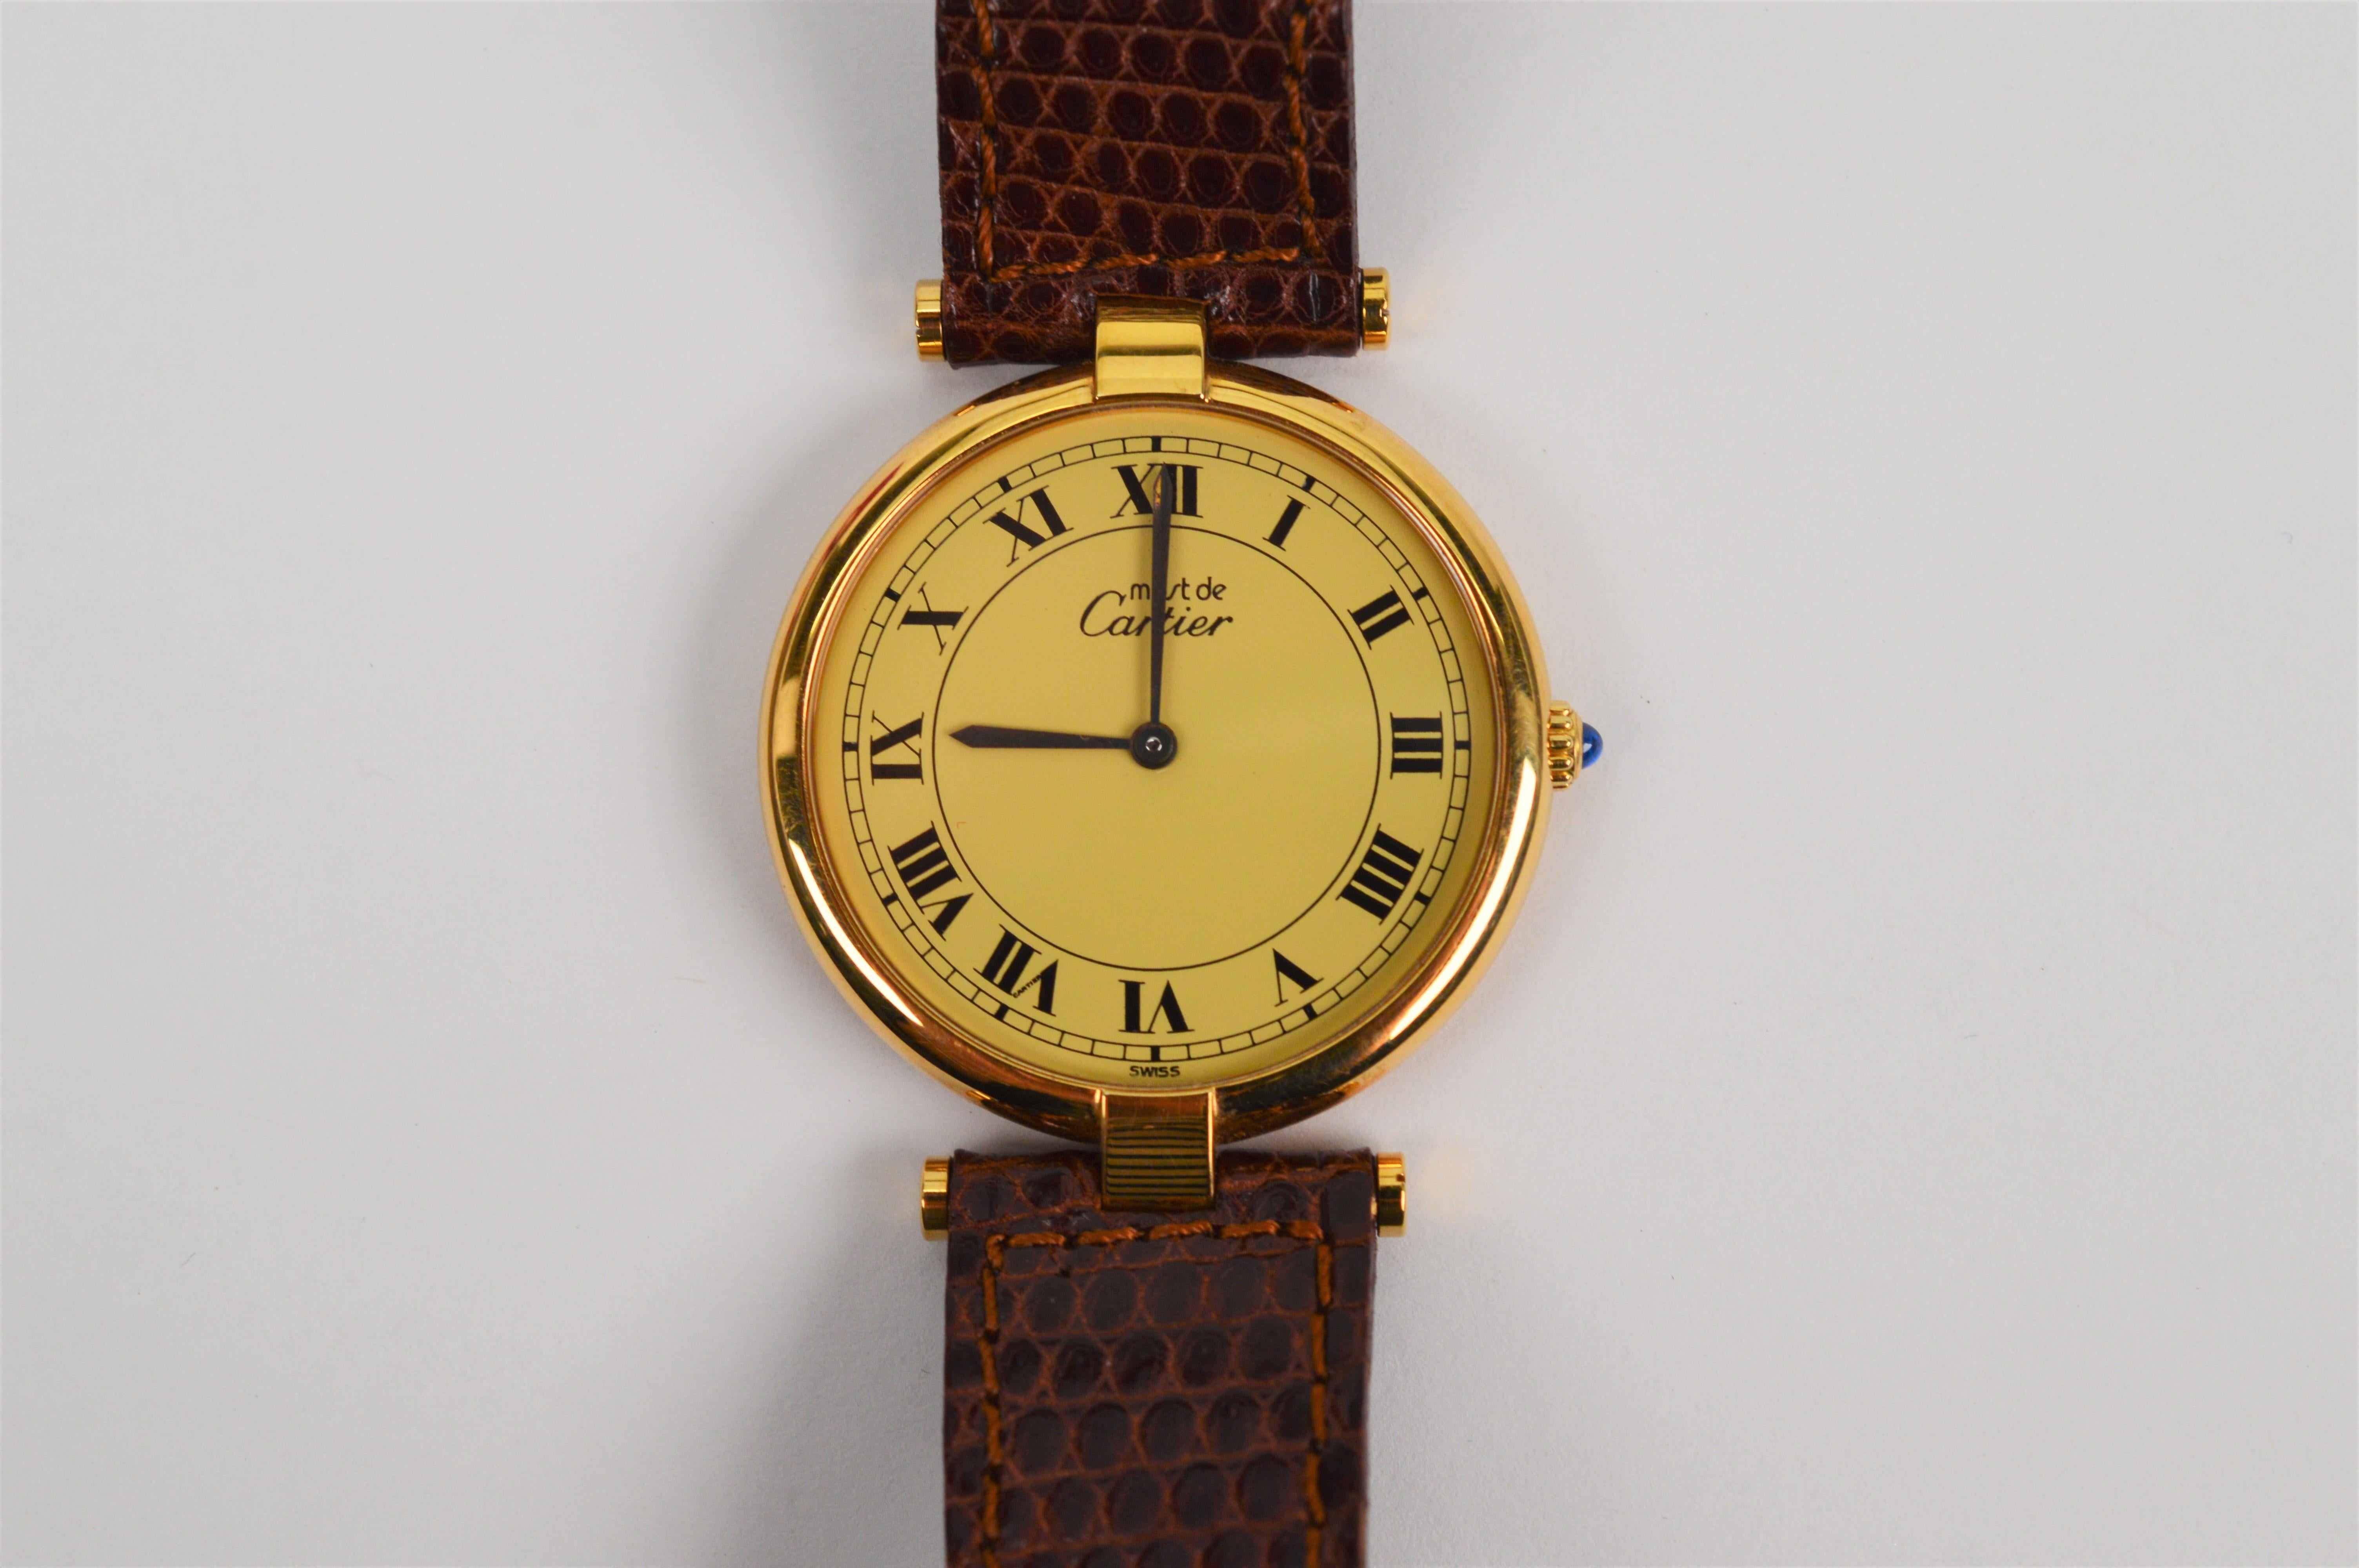 Own this Cartier Must de Cartier Vendome .925 Argent 18K Gold Vermeil Case 24mm Champagne Dial Quartz Watch
Number 060538. Circa 1990, this watch is a battery-powered Swiss made quartz movement. The 30mm case is sterling silver .925 gold plated in